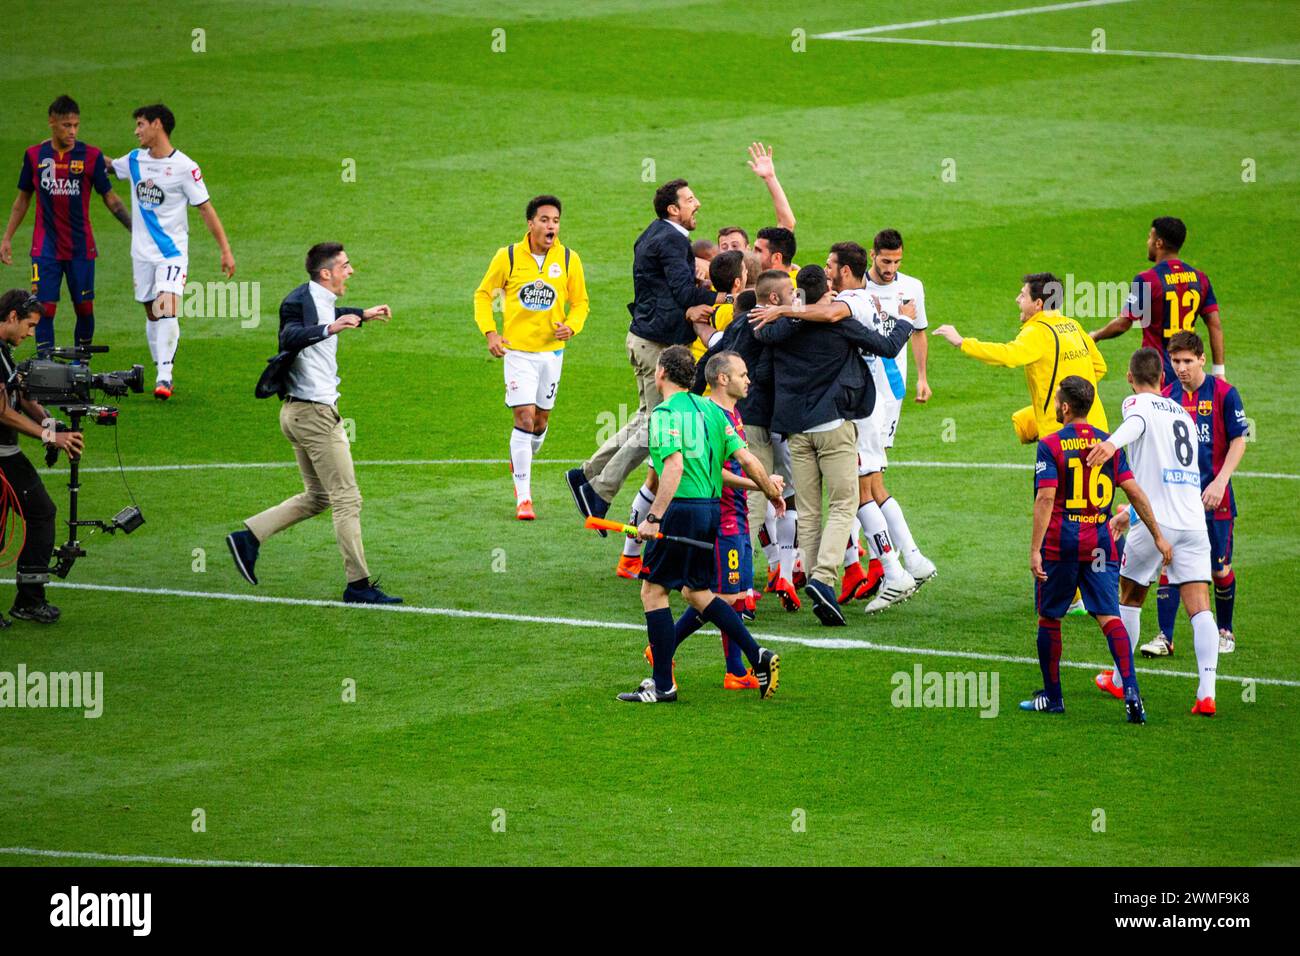 DEPORTIVO, ESCAPE LA LIGA RELEGATION, 2015: Deportivo players celerate wildly at the final whistle as the point ensures La Liga survival. The final game of the La Liga 2014-15 season in Spain between Barcelona FC and Deportivo de La Coruna at Camp Nou, Barcelona on May 23 2015. The Game finished 2-2. Barcelona celebrated winning the championship title and legend Xavi's final home game. Deportiva got the point they needed to avoid relegation. Photograph: Rob Watkins Stock Photo